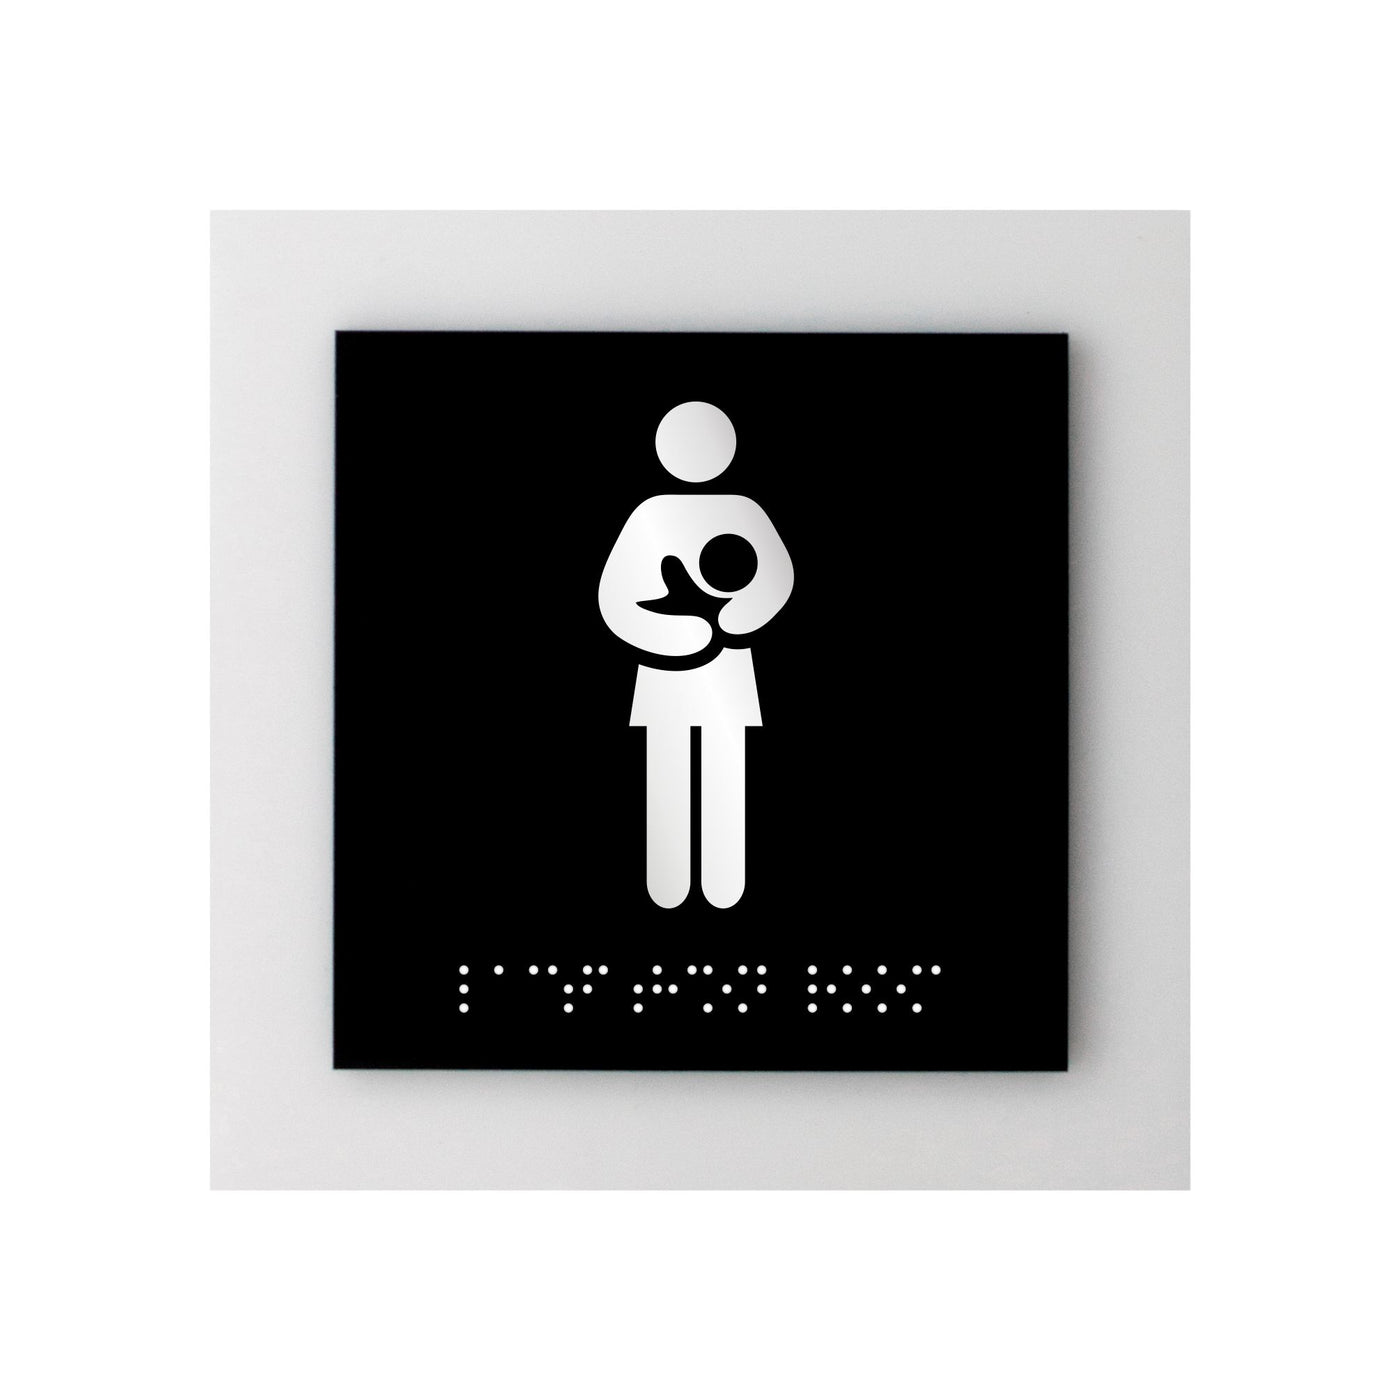 Acrylic Mothers Lactation Room Sign "Simple" Design